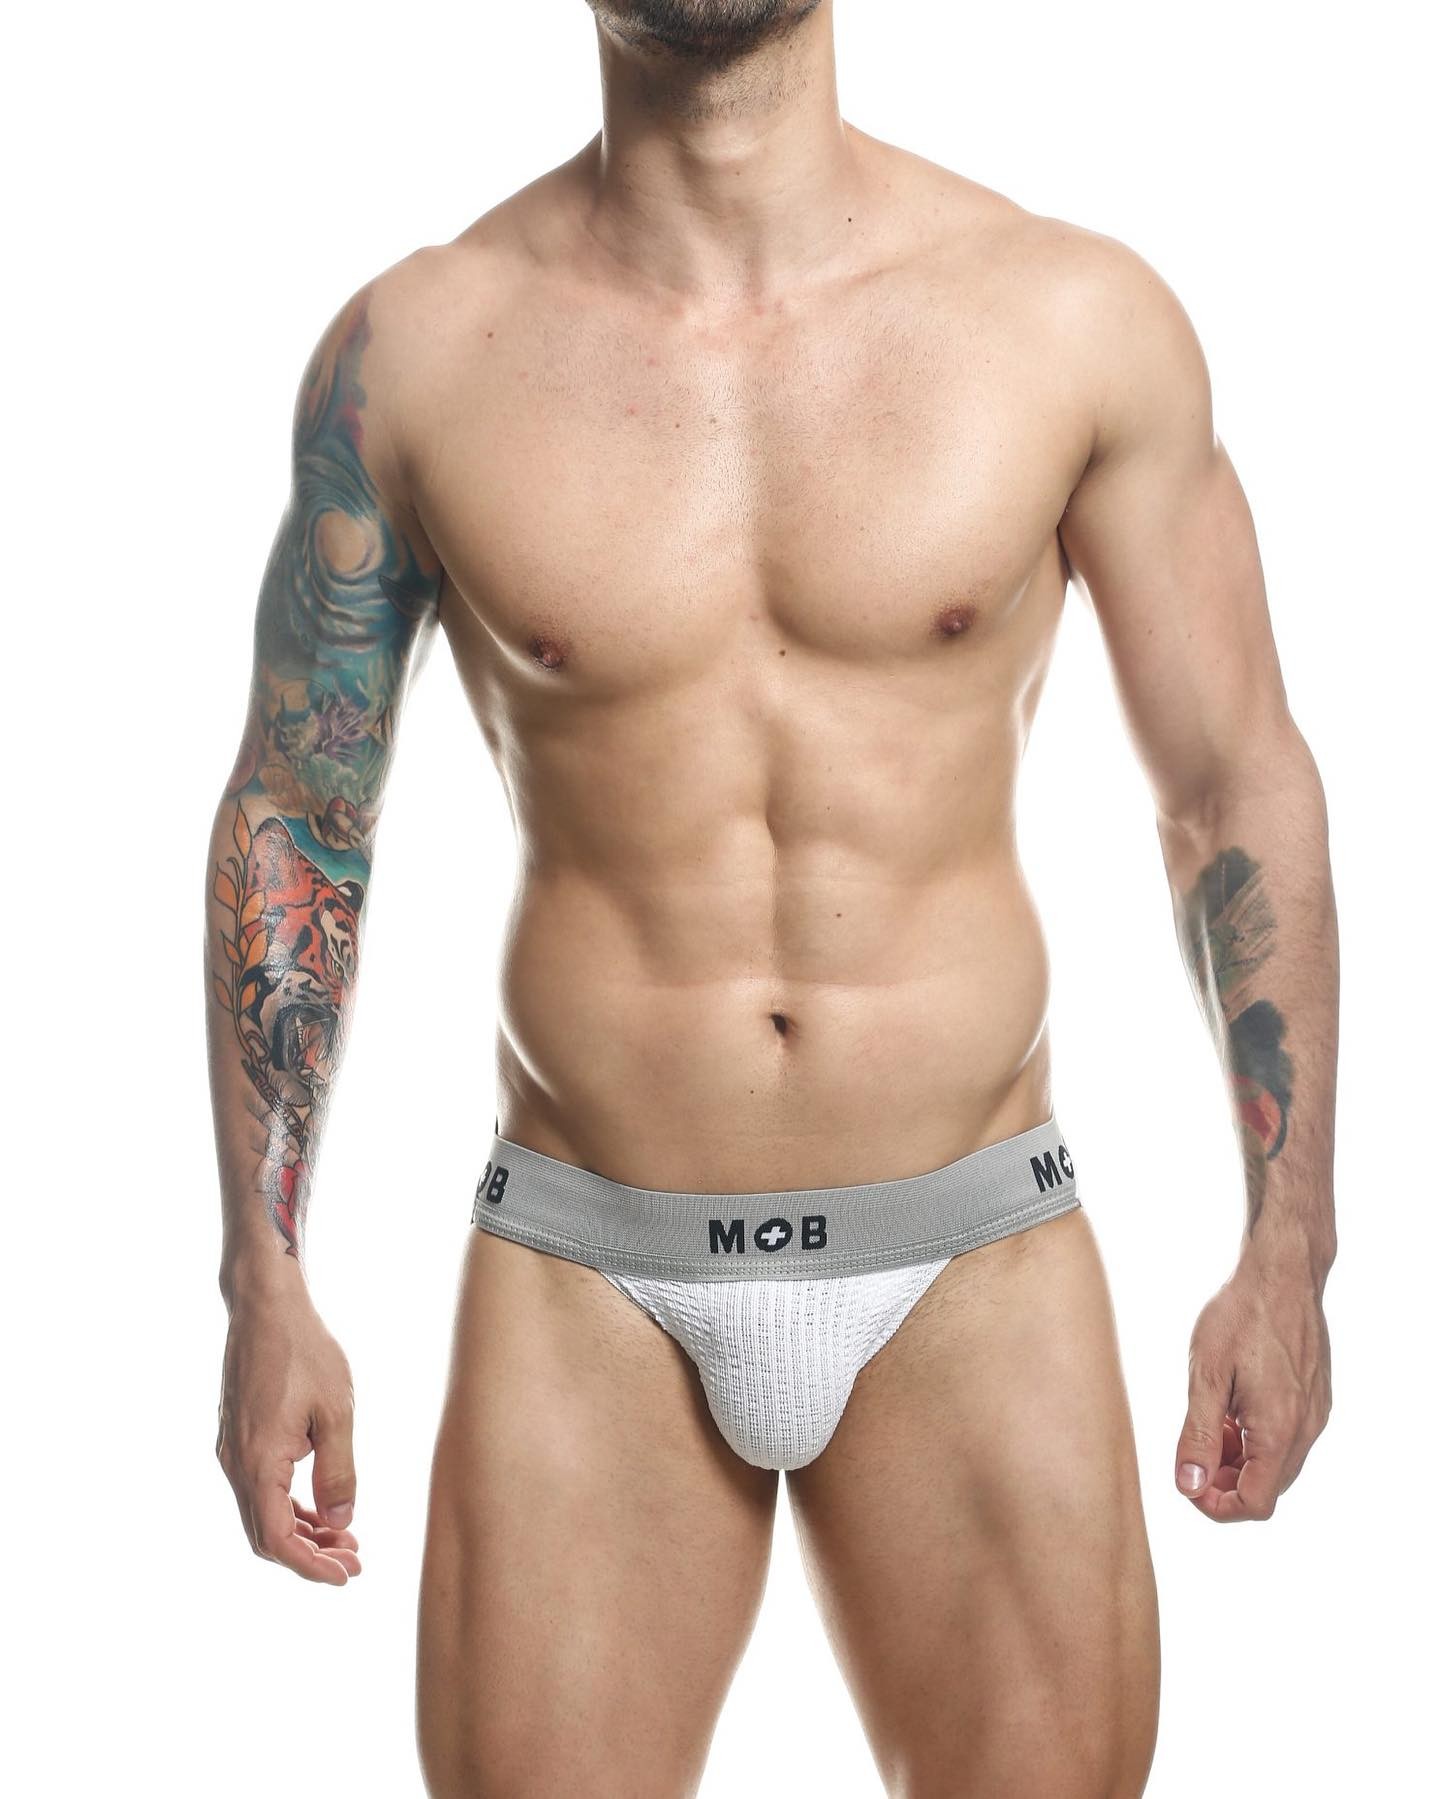 Read in our Magazine today, What's Hot in the USA, the Valentine's Day edition, written by UNB Store
_____
http://www.menandunderwear.com/2022/01/whats-hot-in-the-us-the-valentines-day-edition.html